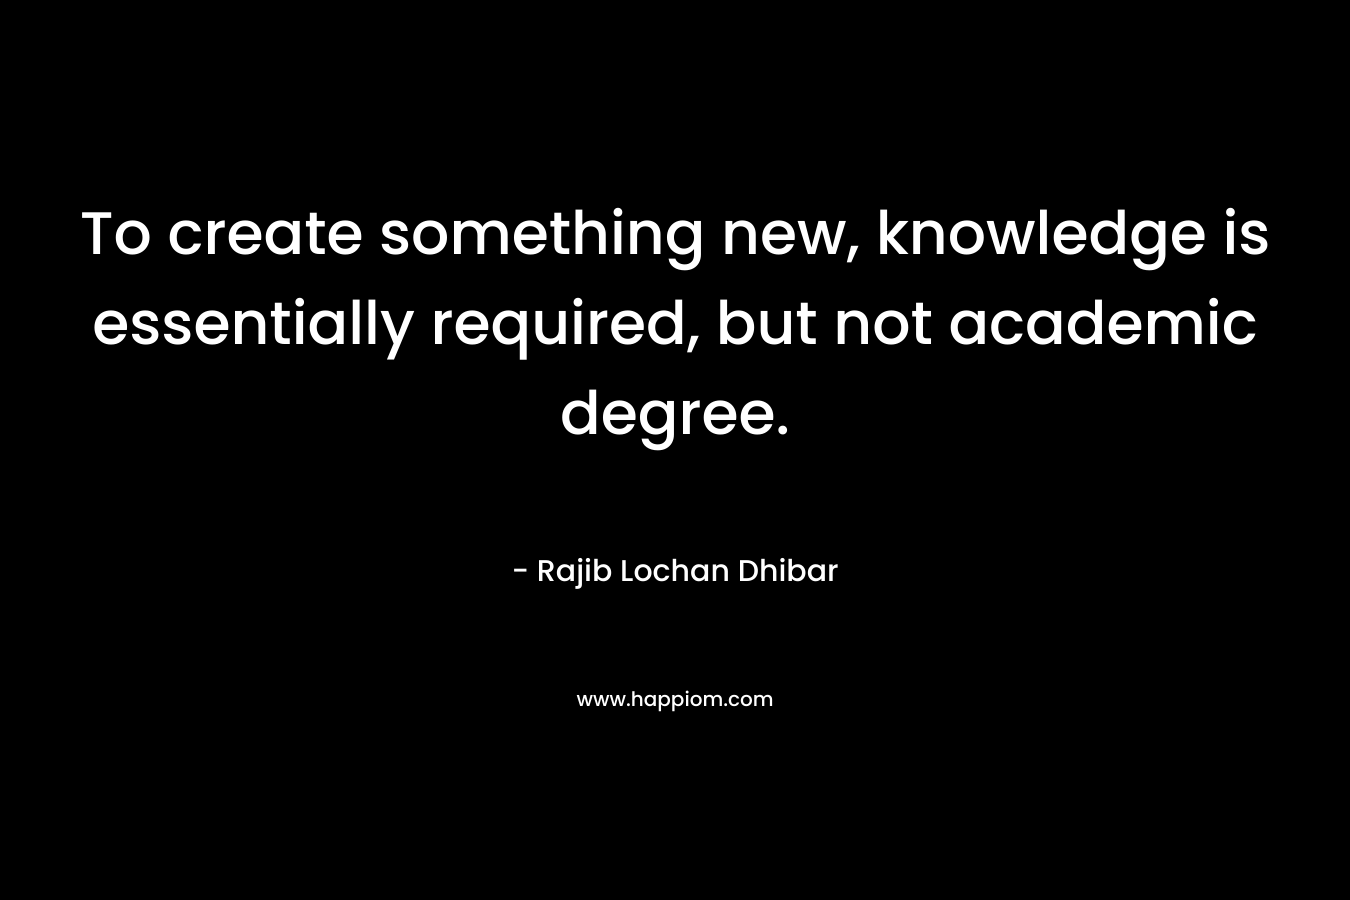 To create something new, knowledge is essentially required, but not academic degree. – Rajib Lochan Dhibar